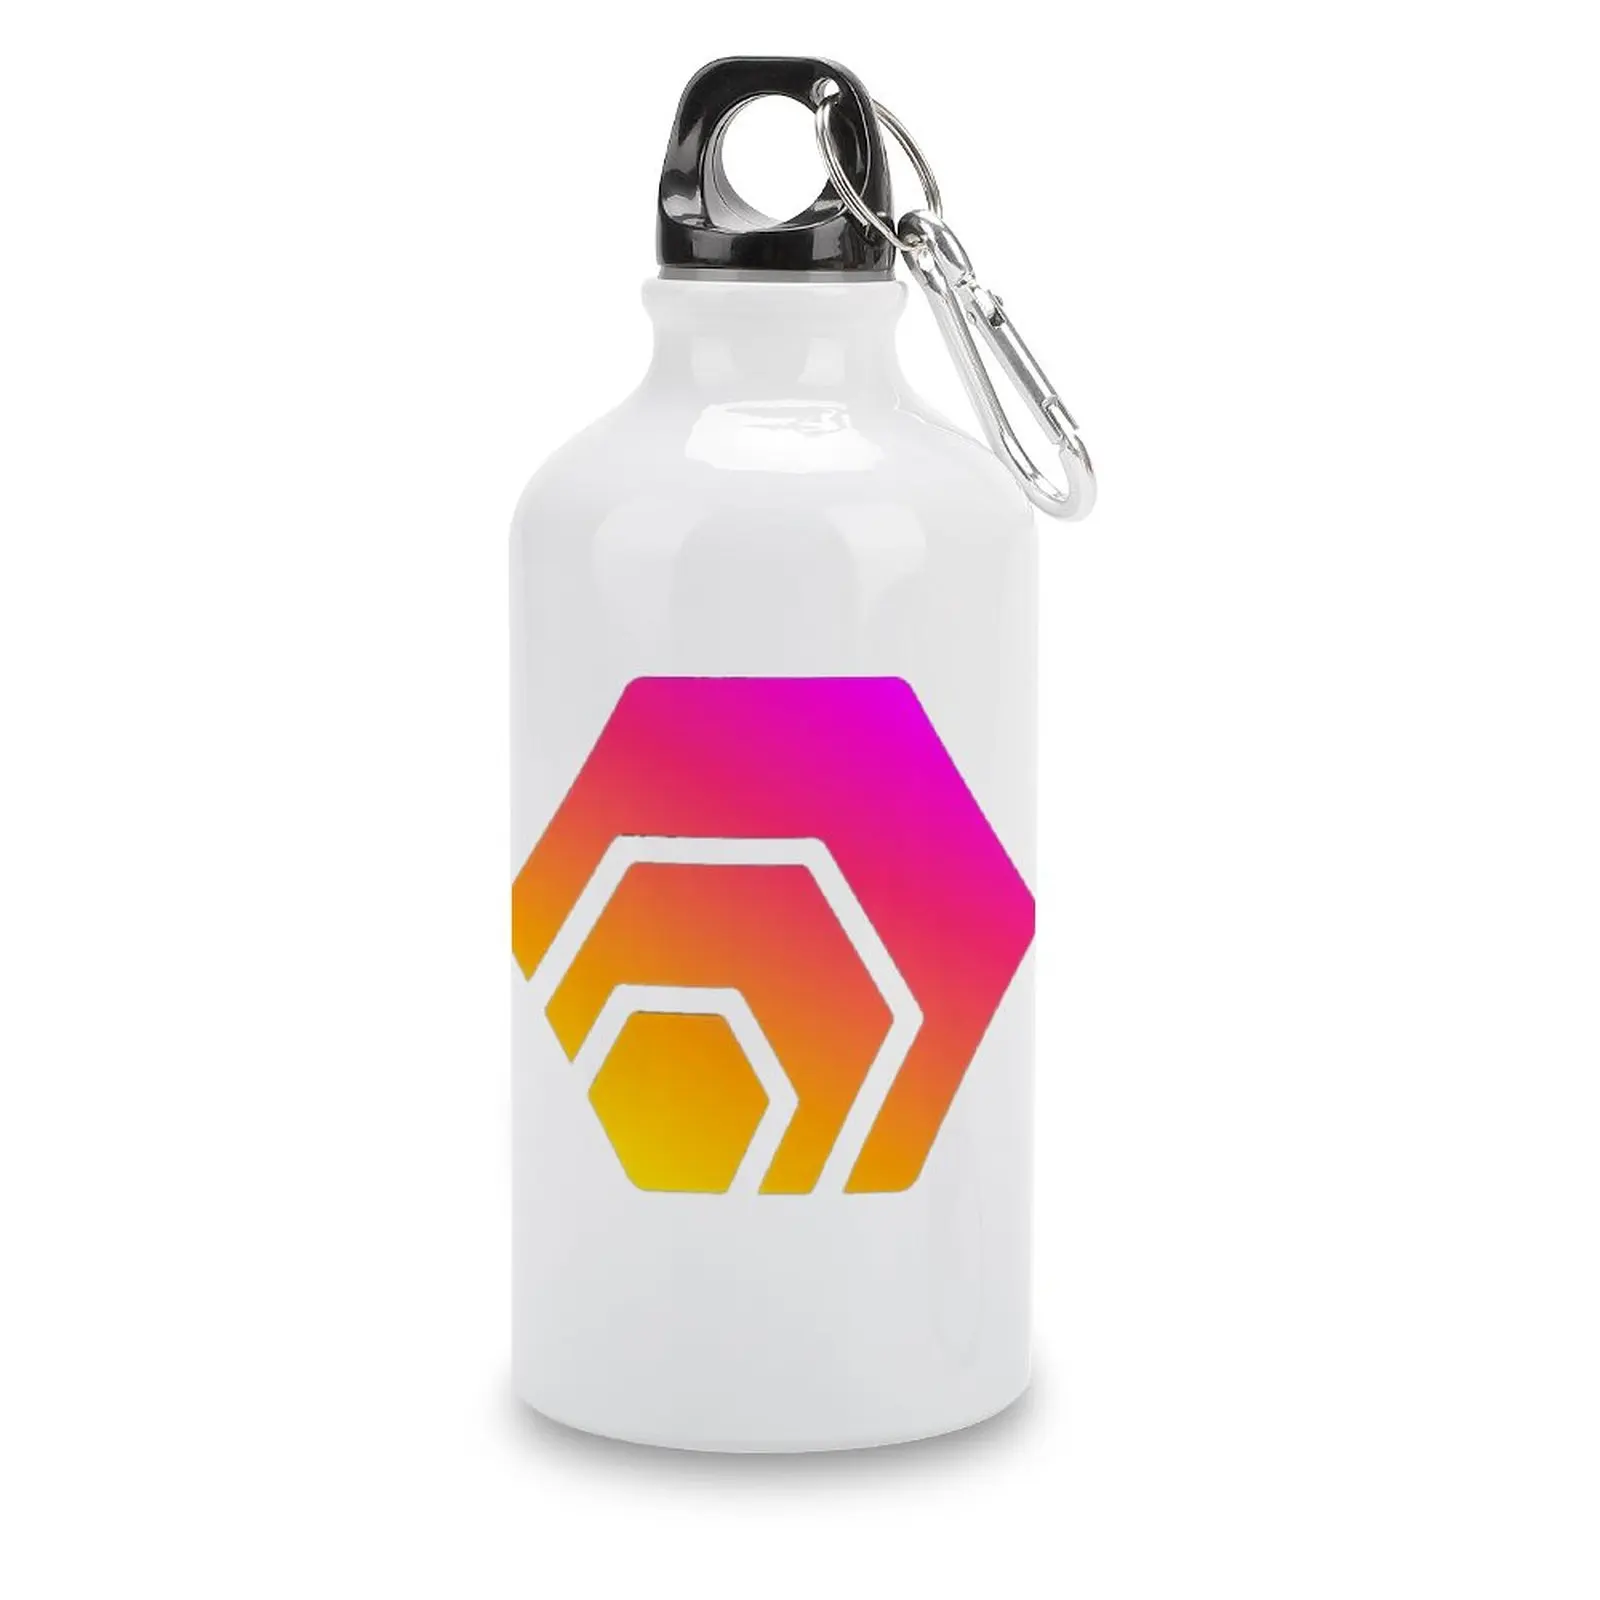 

DIY Sport Bottle Aluminum HEX Crypto Canteen Coffee Cups Thermos Flask Humor Graphic Novelty Kettle